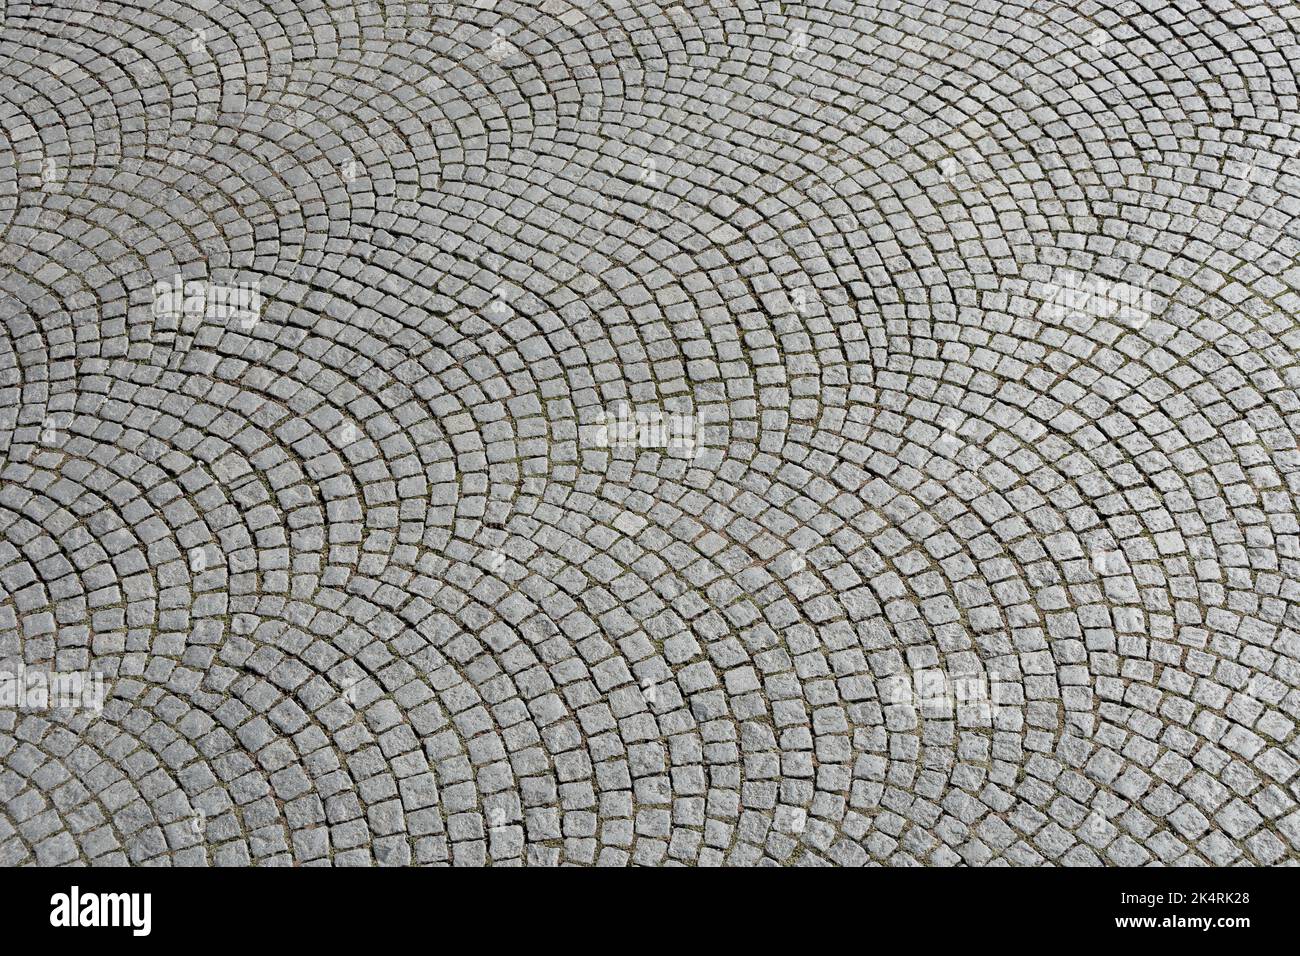 Natural stone paving laid in segment arches Stock Photo